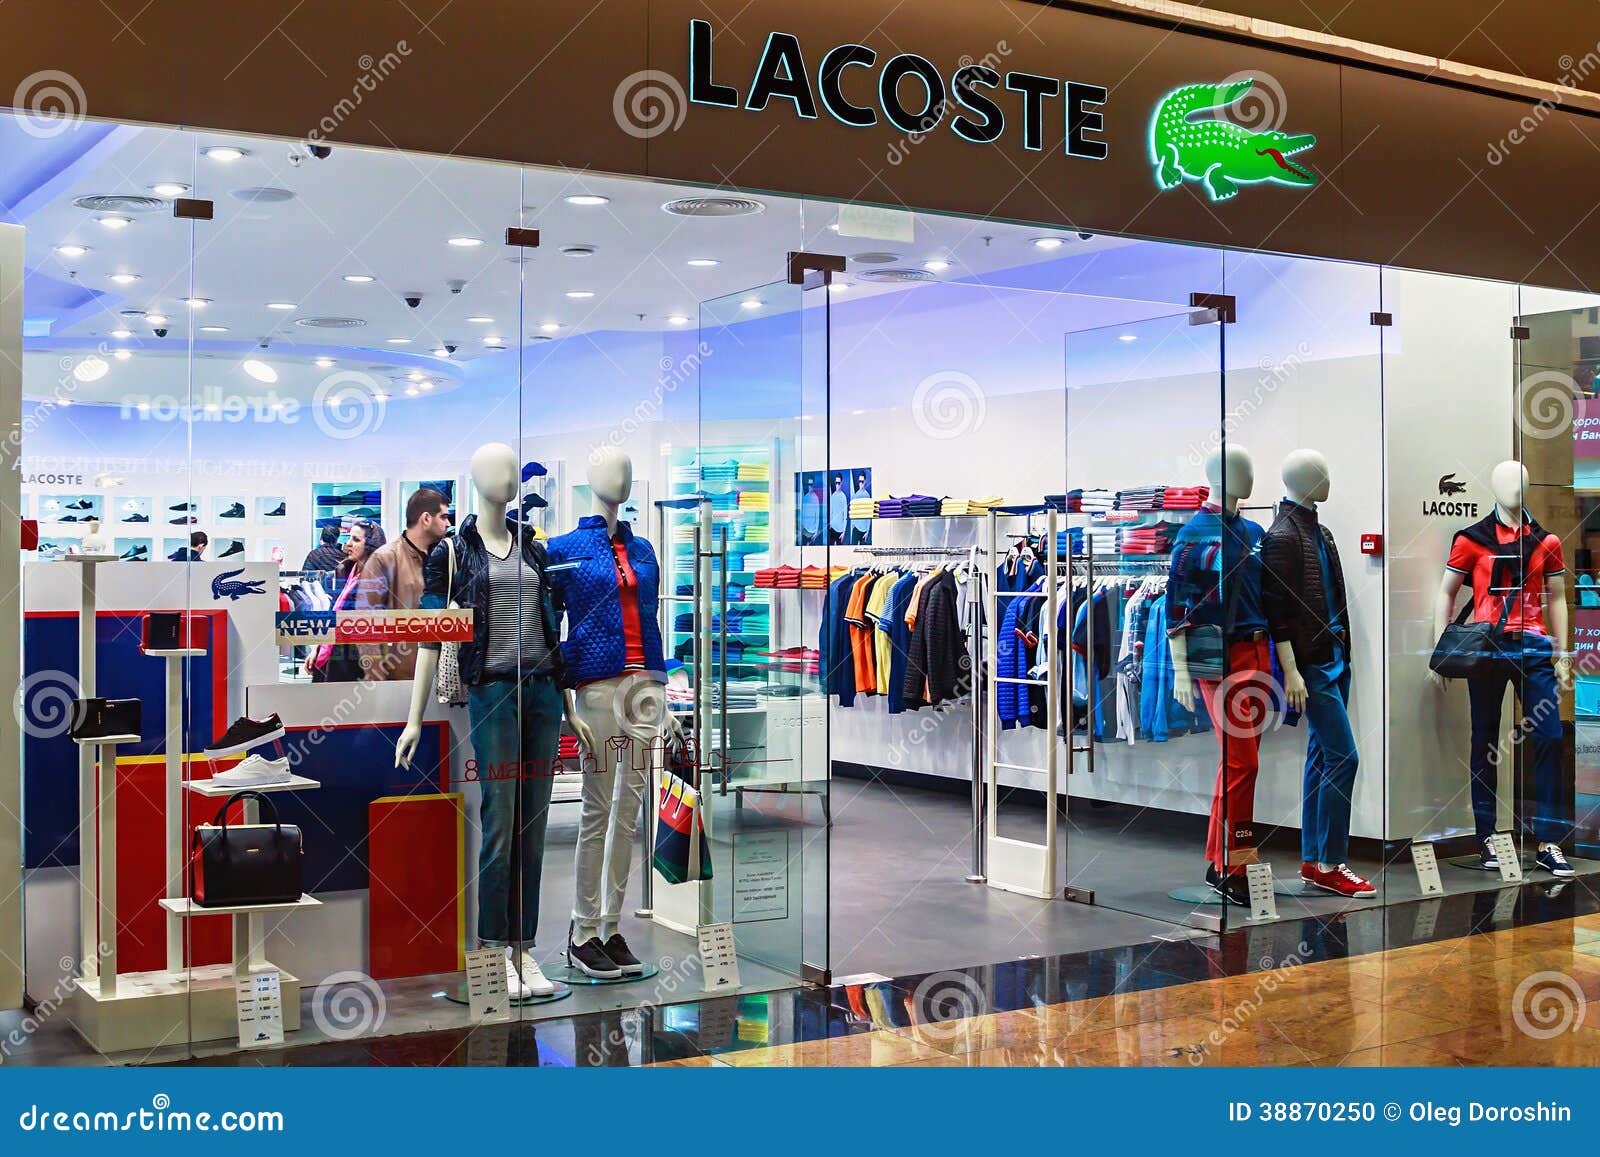 mekanisme stabil Charles Keasing Lacoste Shop Windows in a Shopping Center Moscow. Editorial Image - Image  of modern, business: 38870250